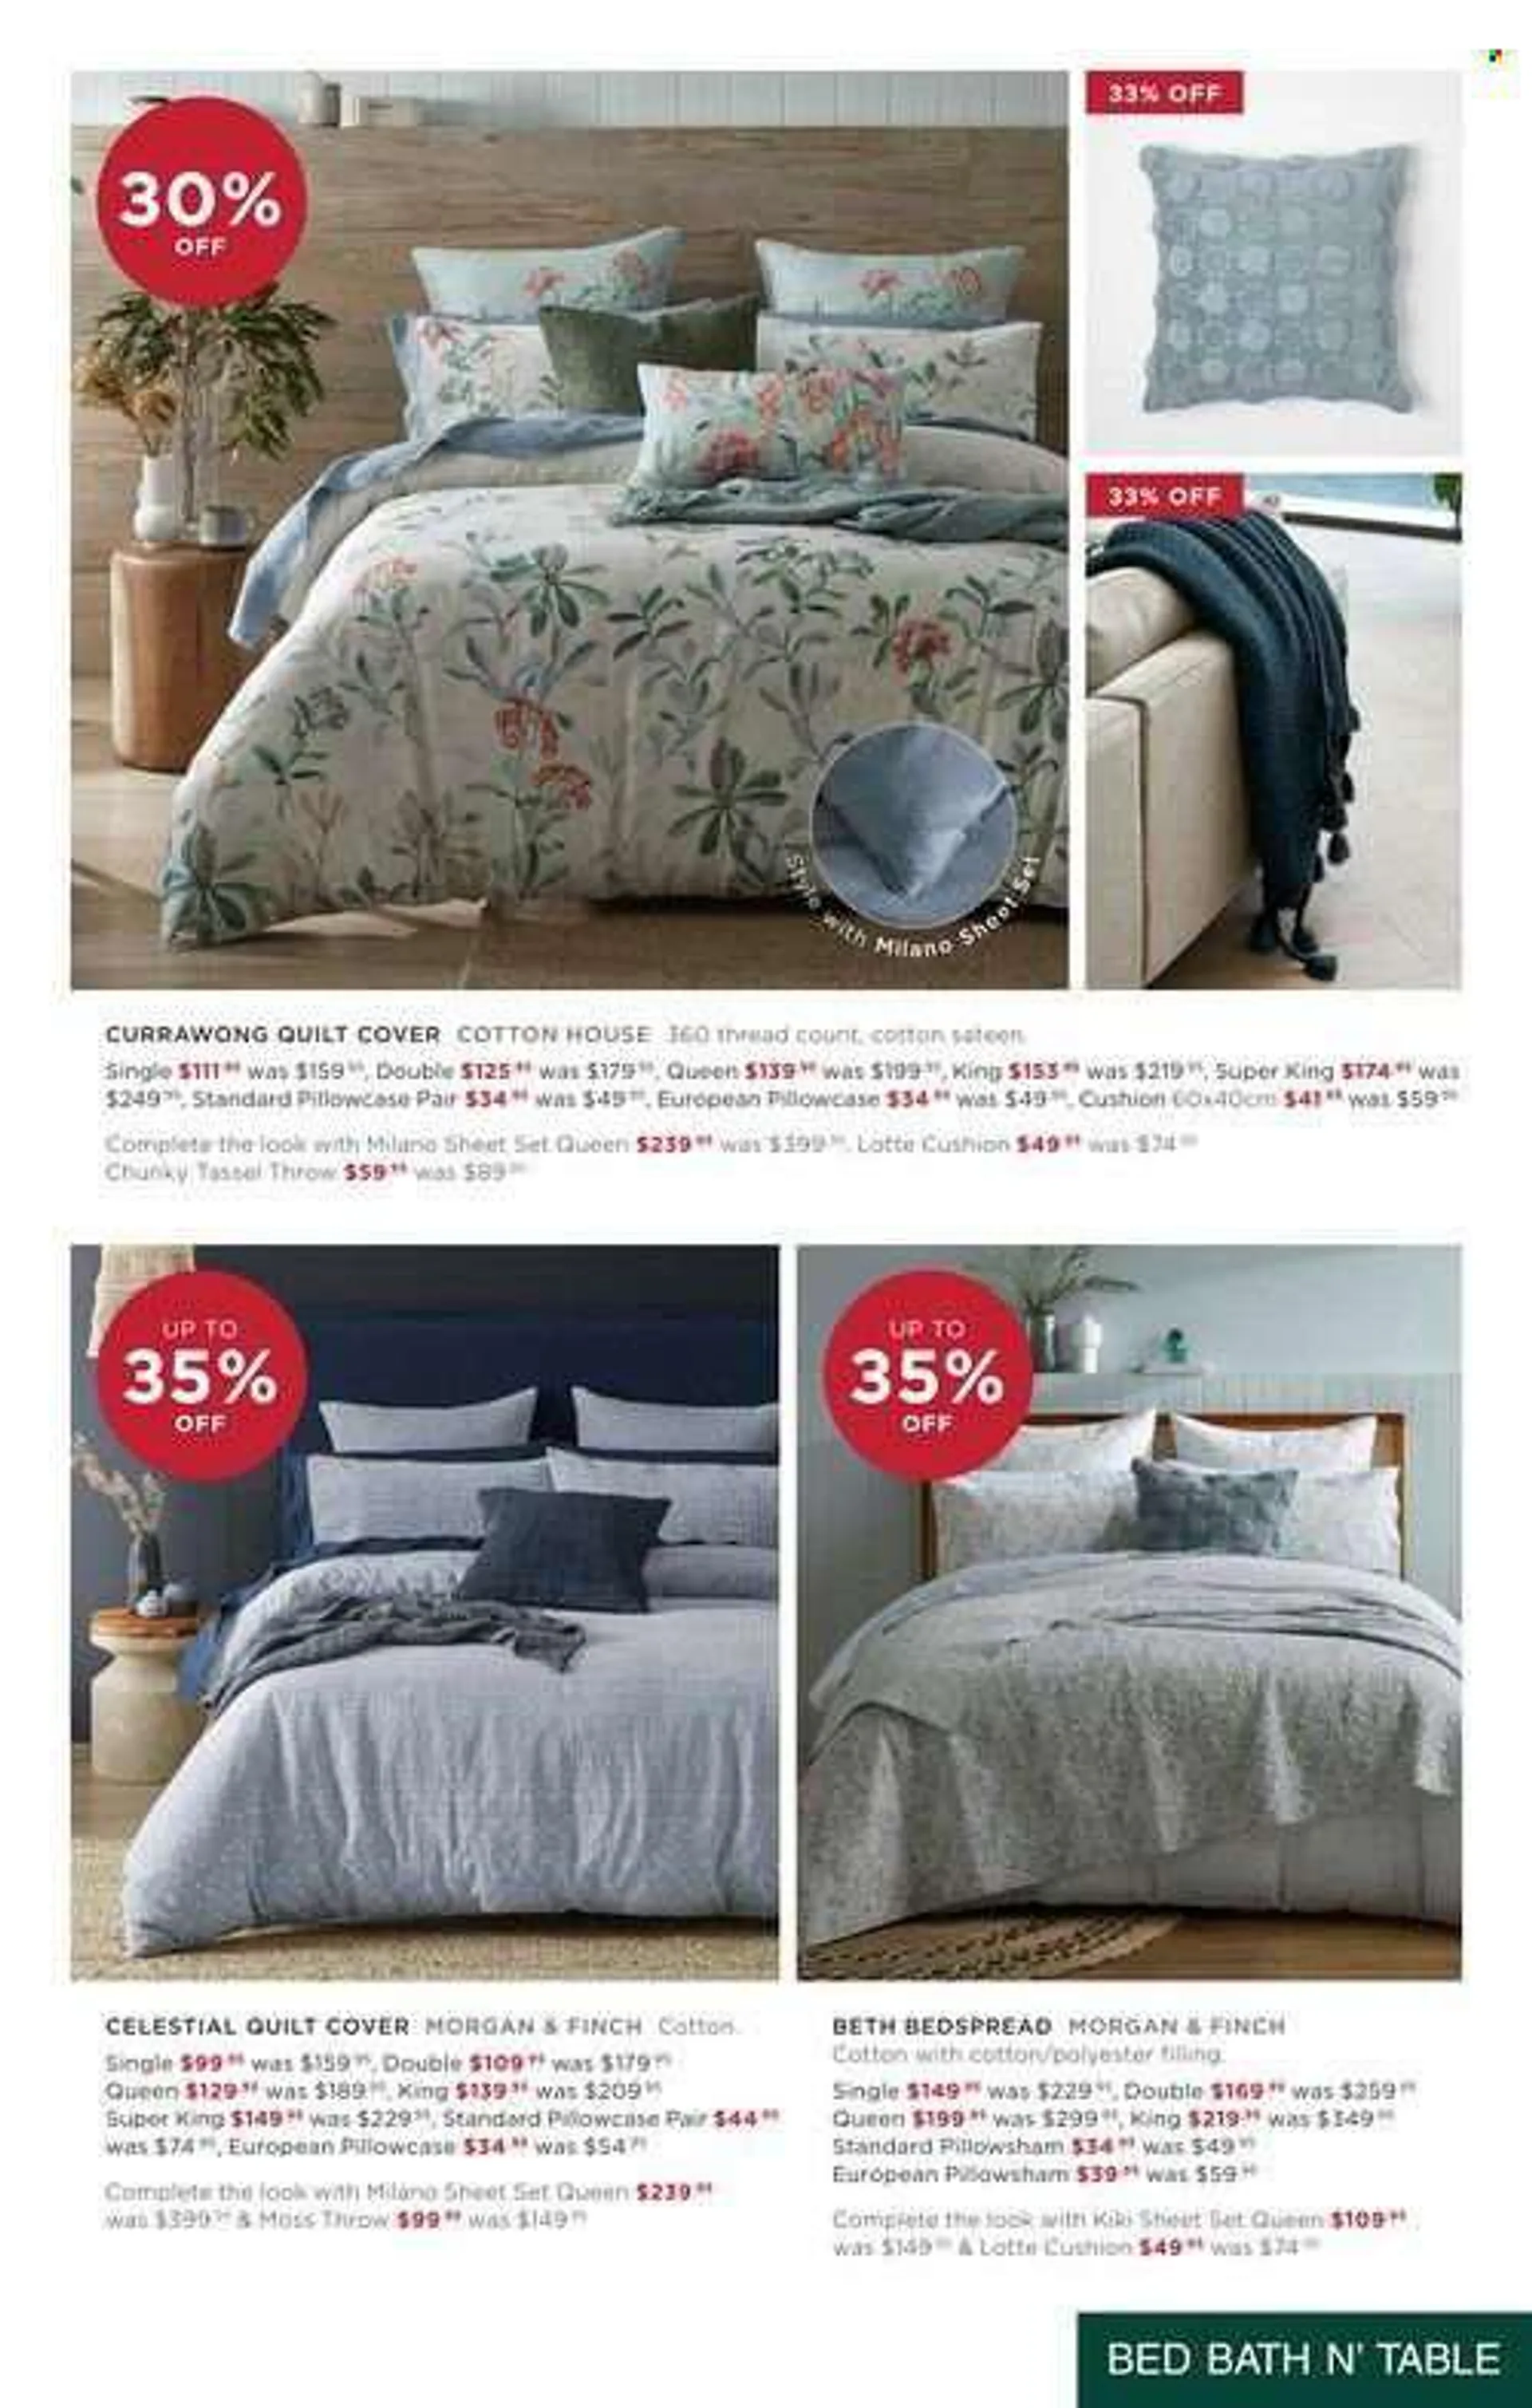 Bed Bath and Table mailer - 19.05.2022 - 24.05.2022. - 19 May 24 May 2022 - Page 3